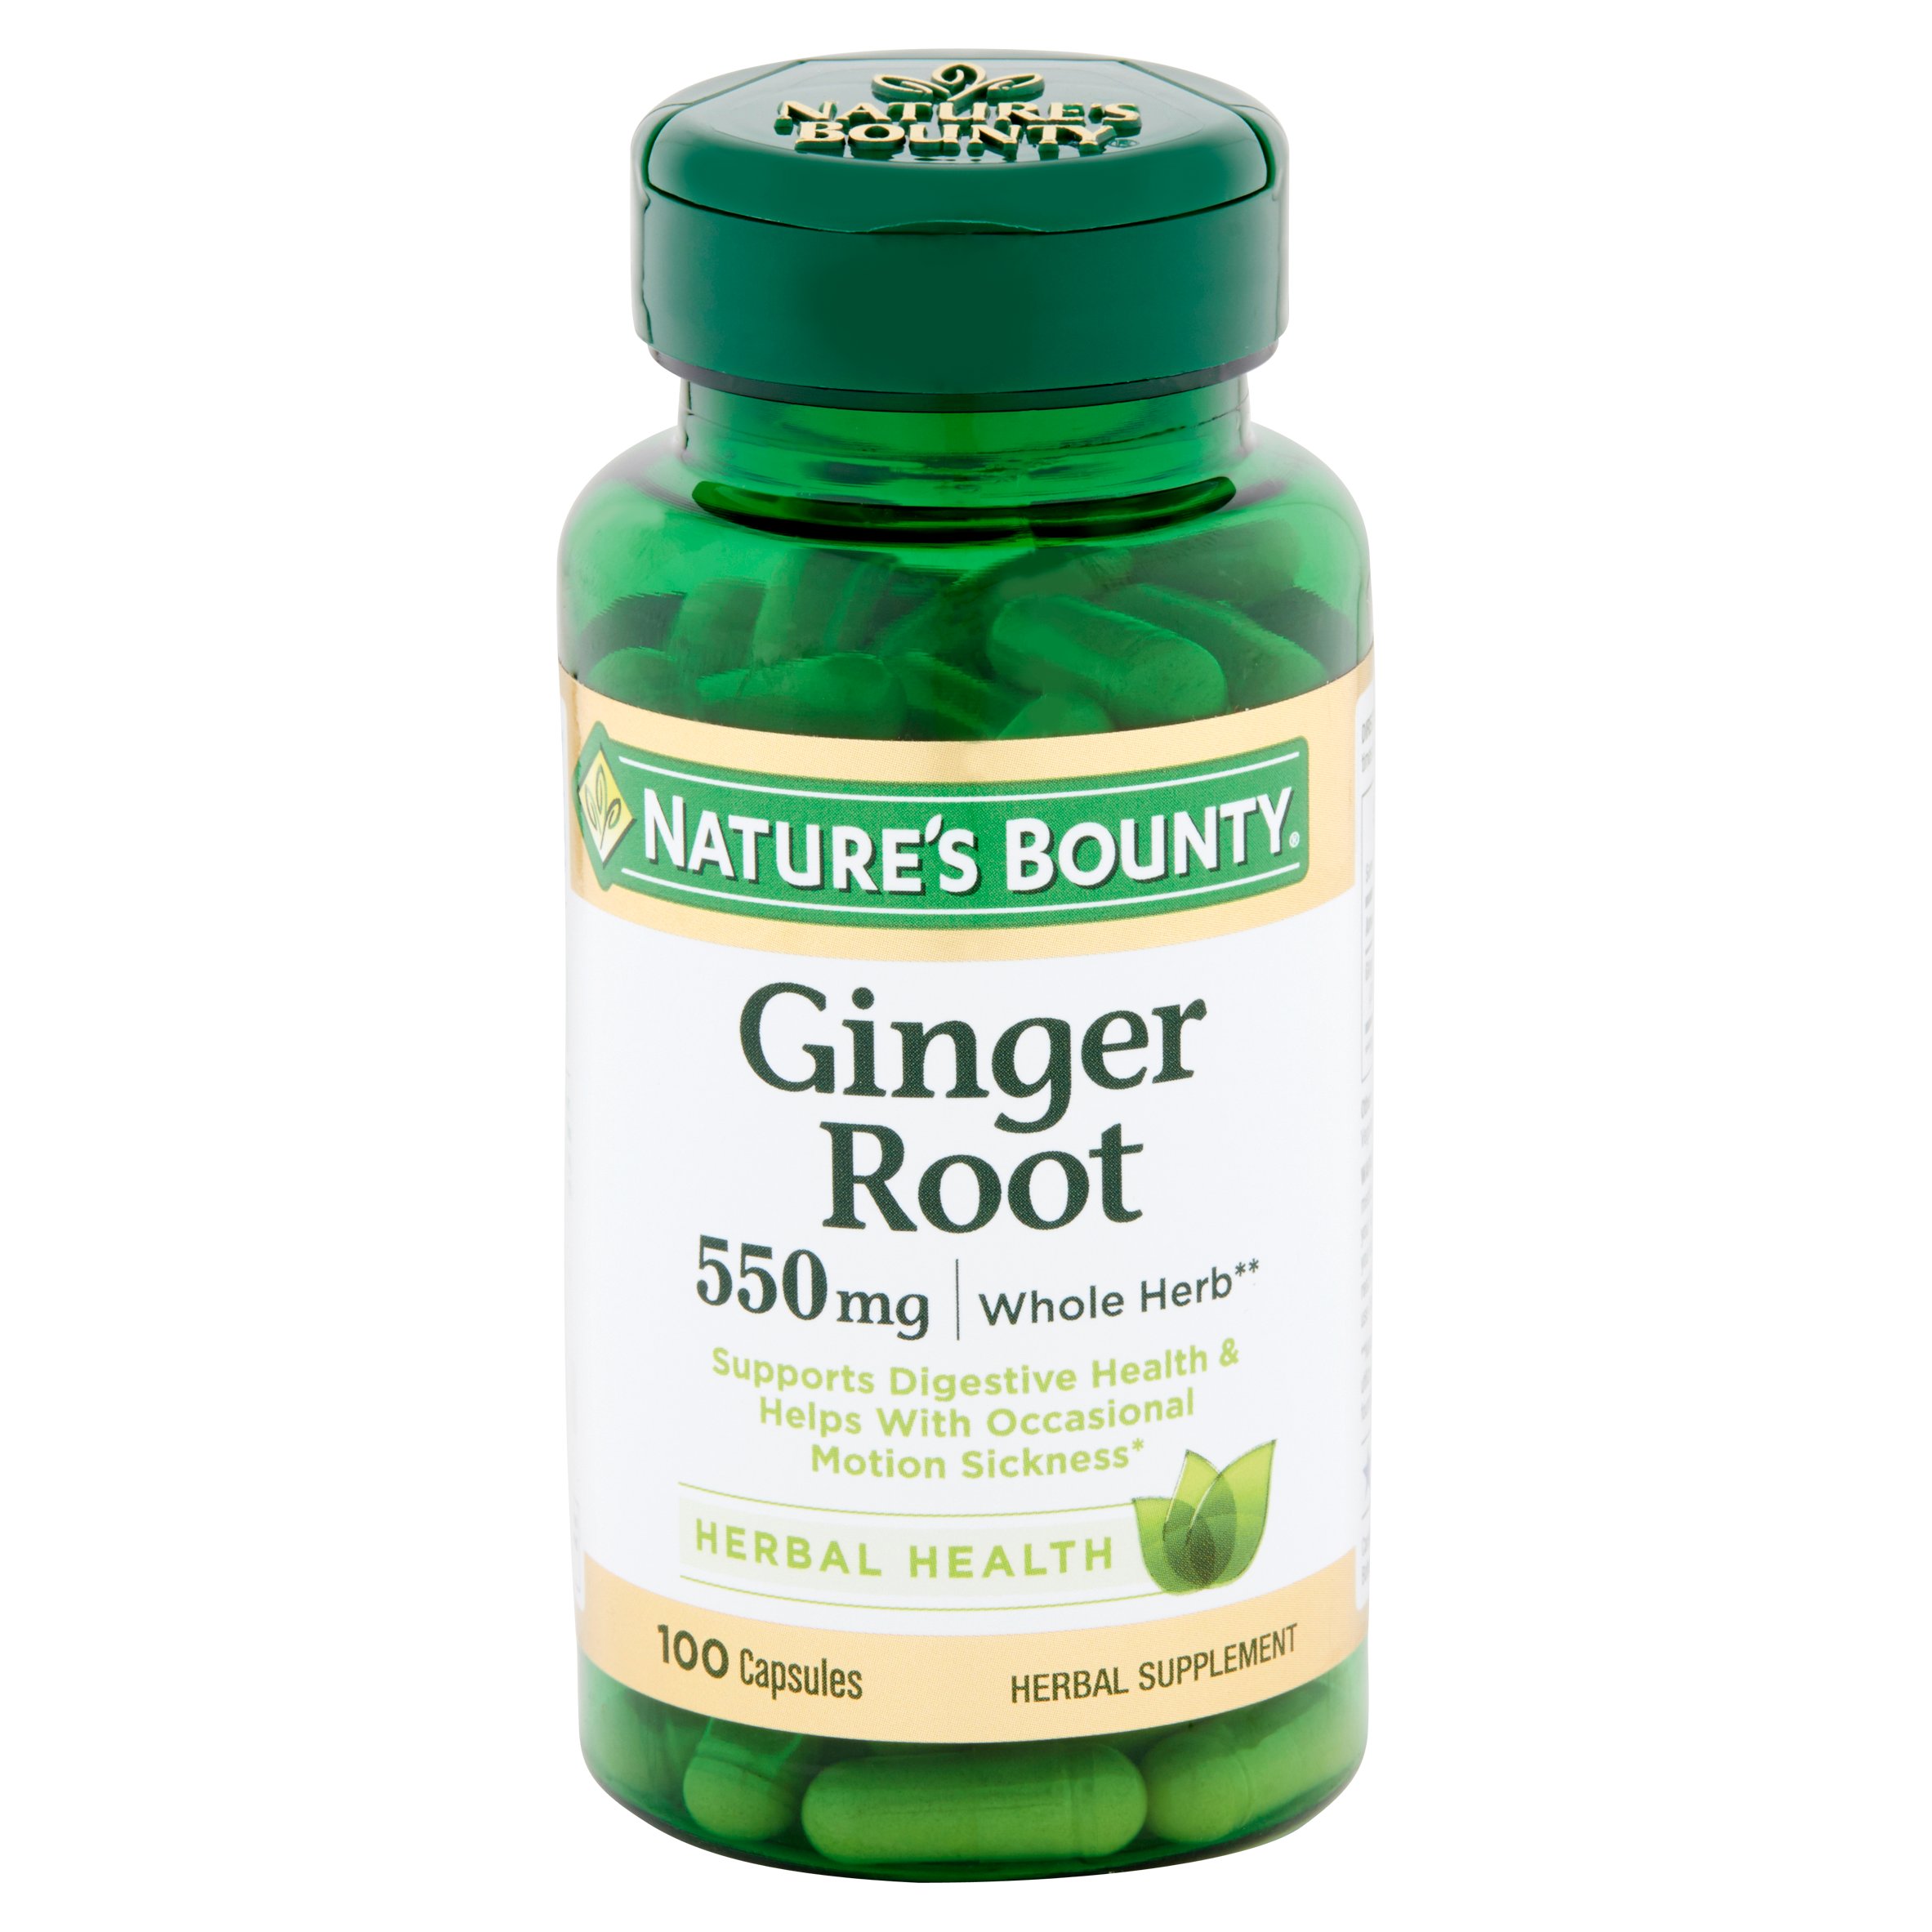 Nature's Bounty Ginger Root Capsules, 550 Mg, 100 Ct - image 2 of 5